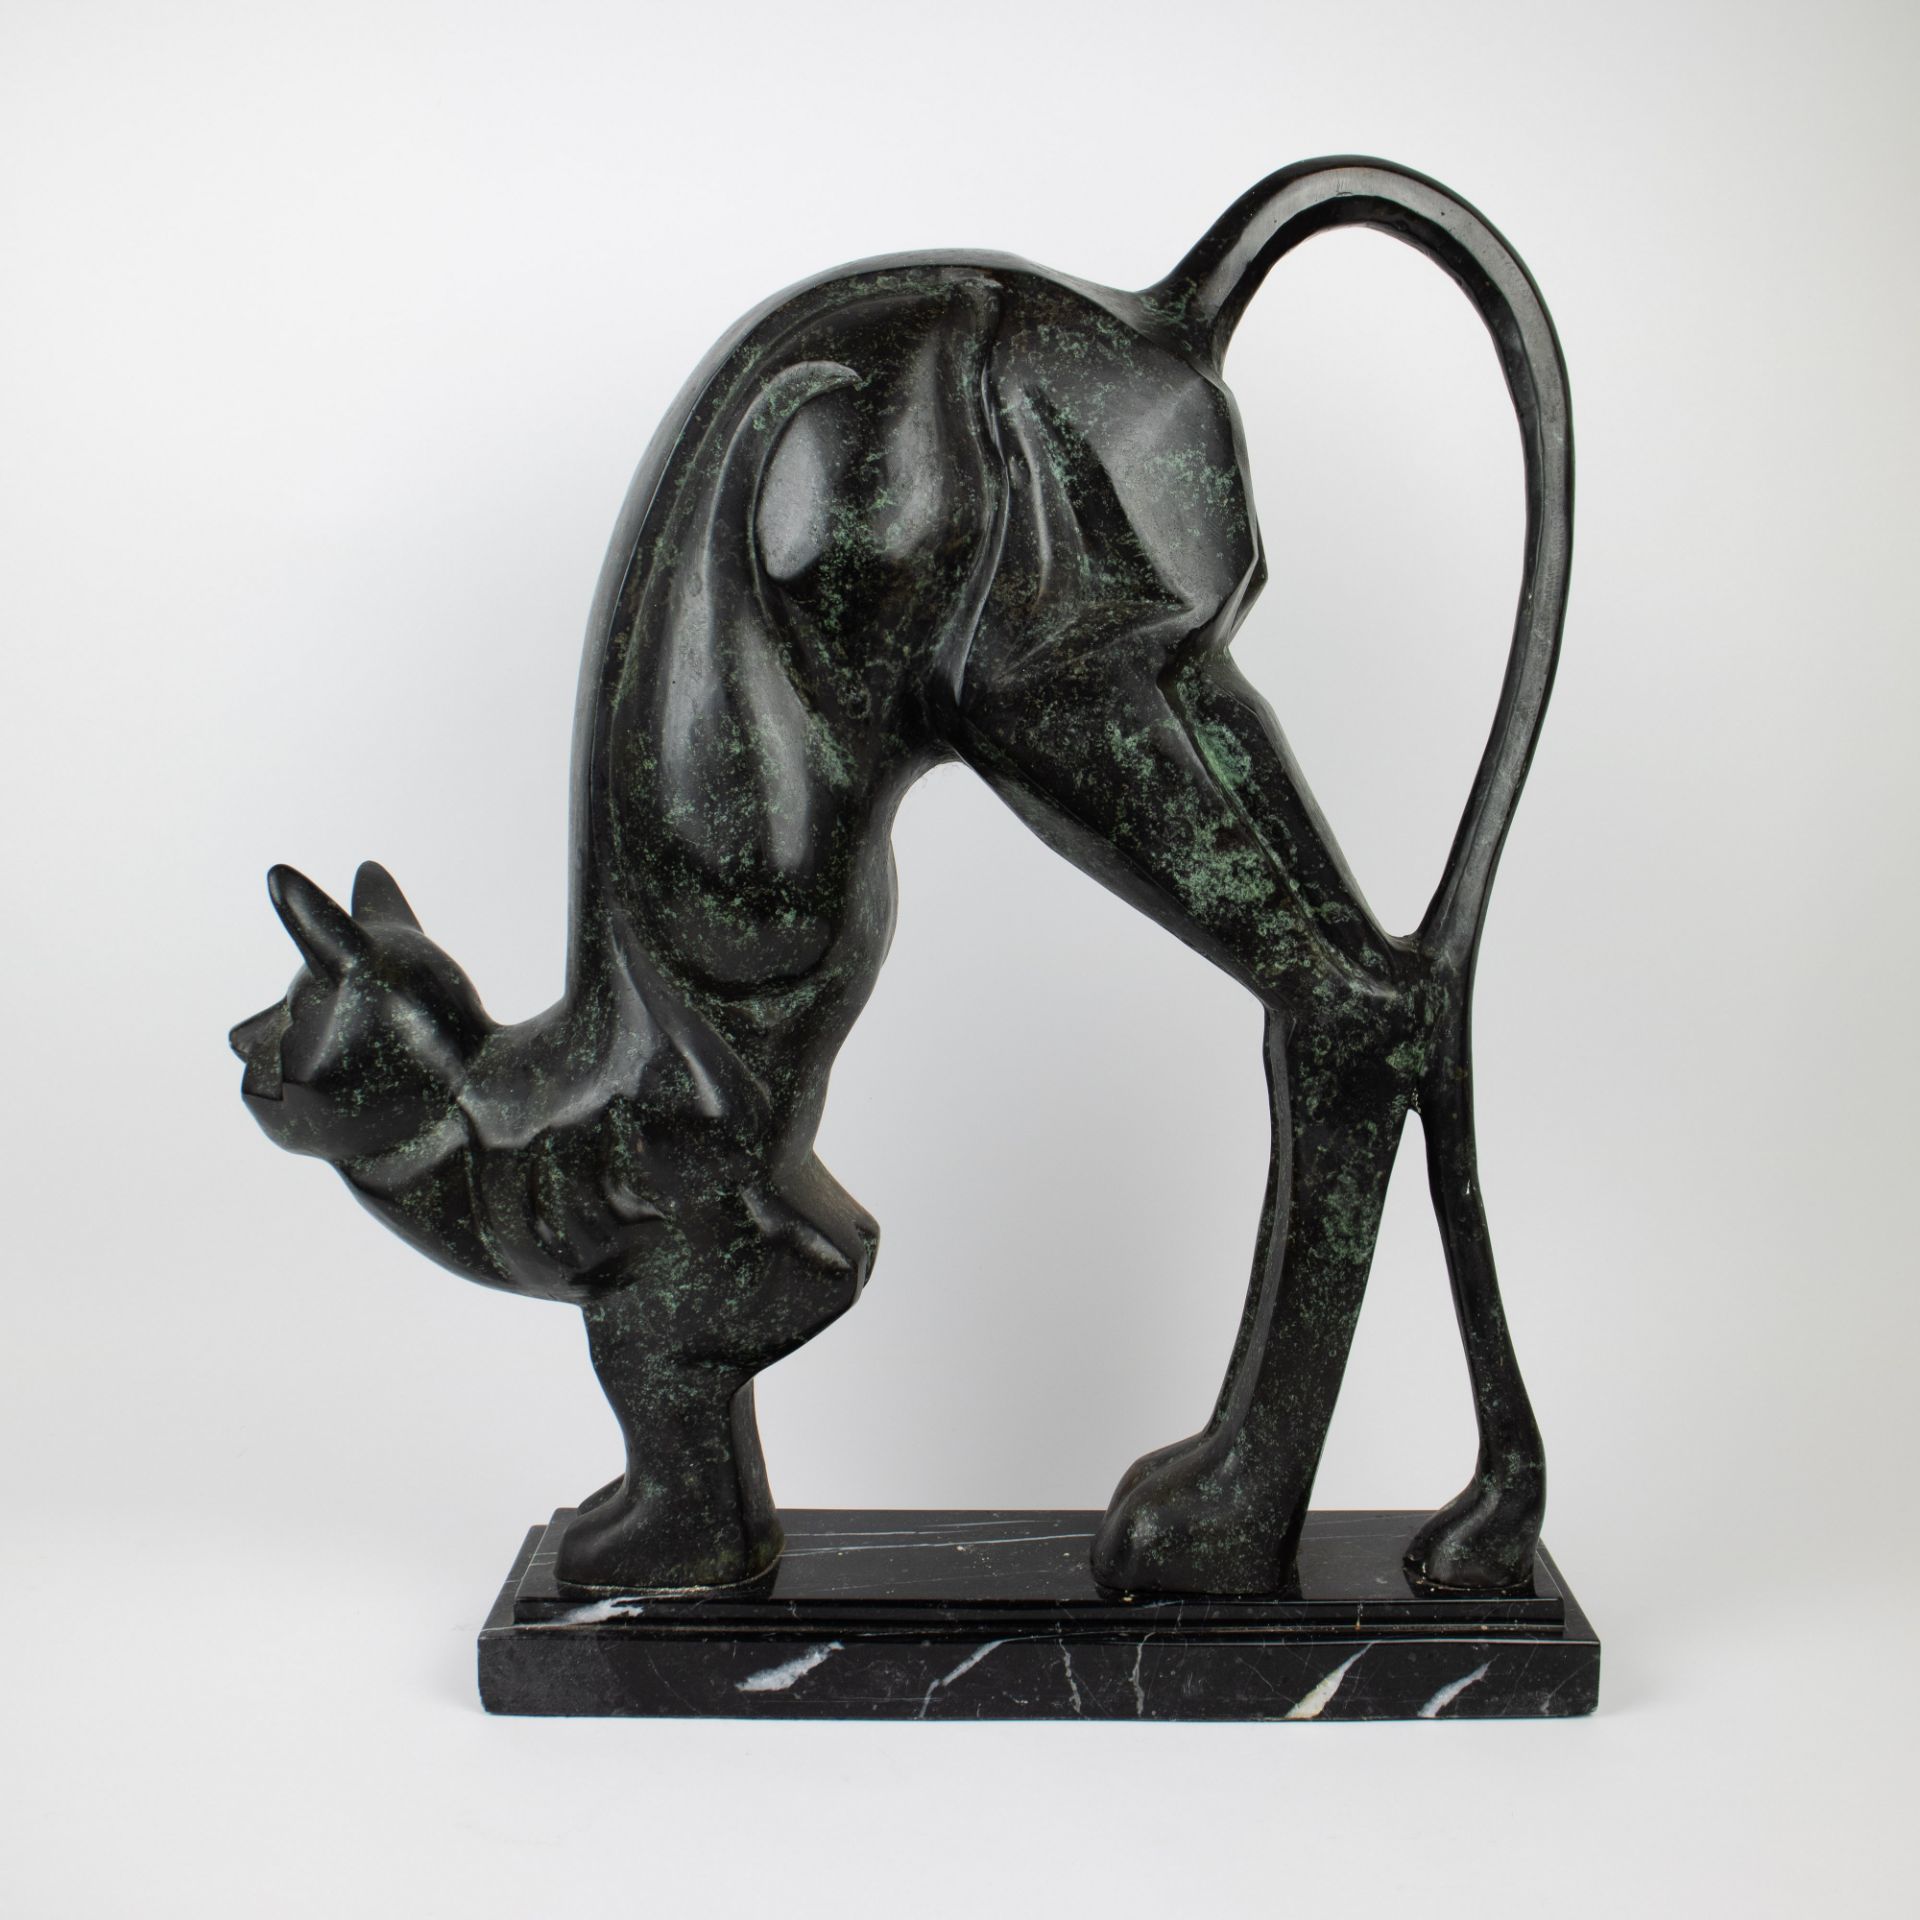 A bronze sculpture of a cat on marble base.